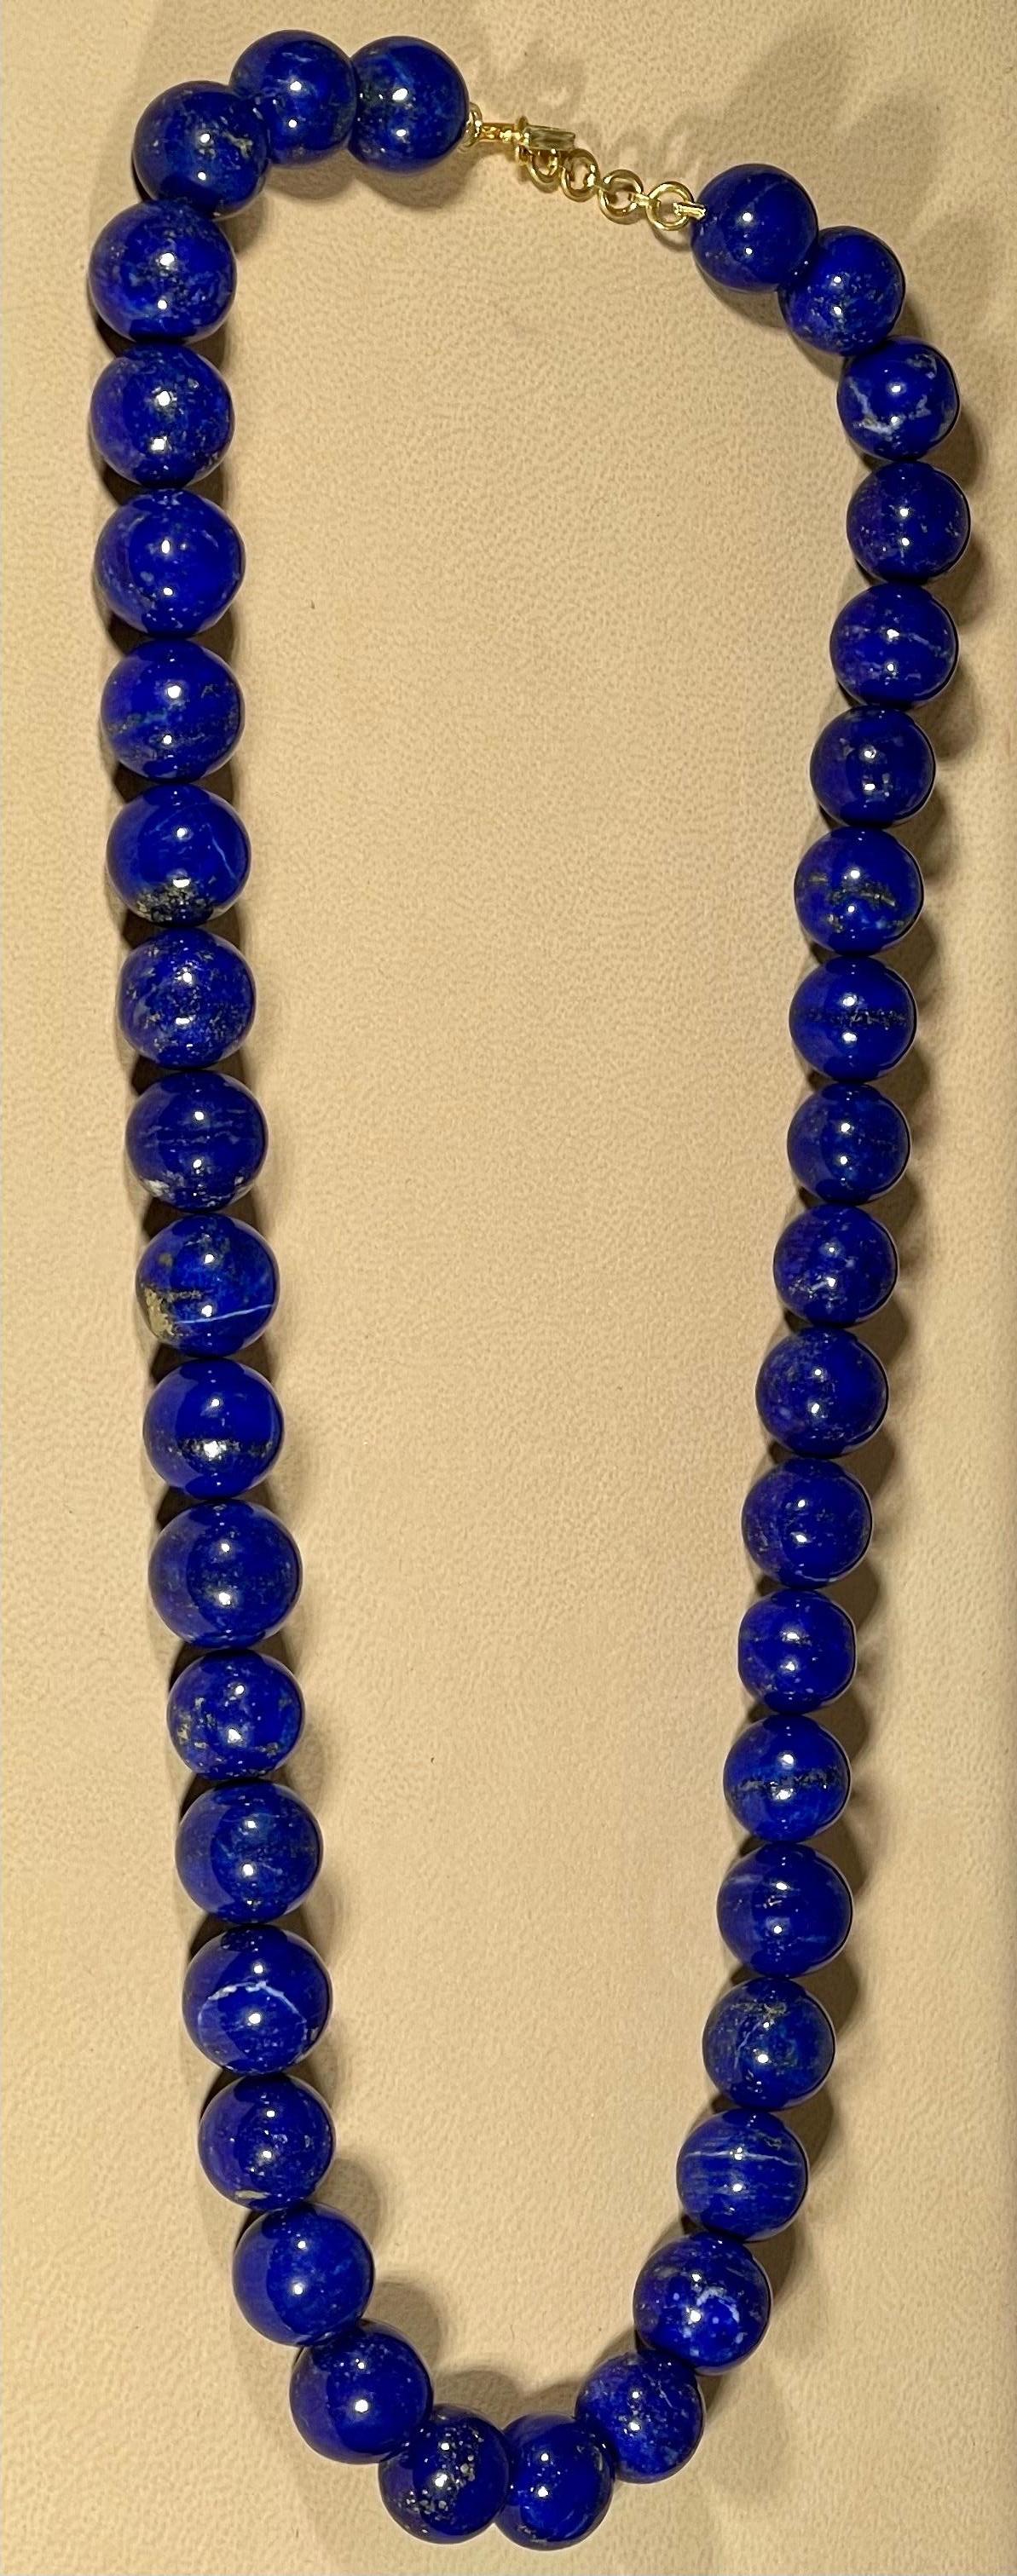 Vintage Lapis Lazuli Single Strand Necklace With 14 Karat Yellow Gold  adjustable clasp
This marvelous vintage Lapis Lazuli  necklace features 1 row of luscious  Beads
(measuring approximately average  12-12.6 mm)  
strand is 20 inches long
There